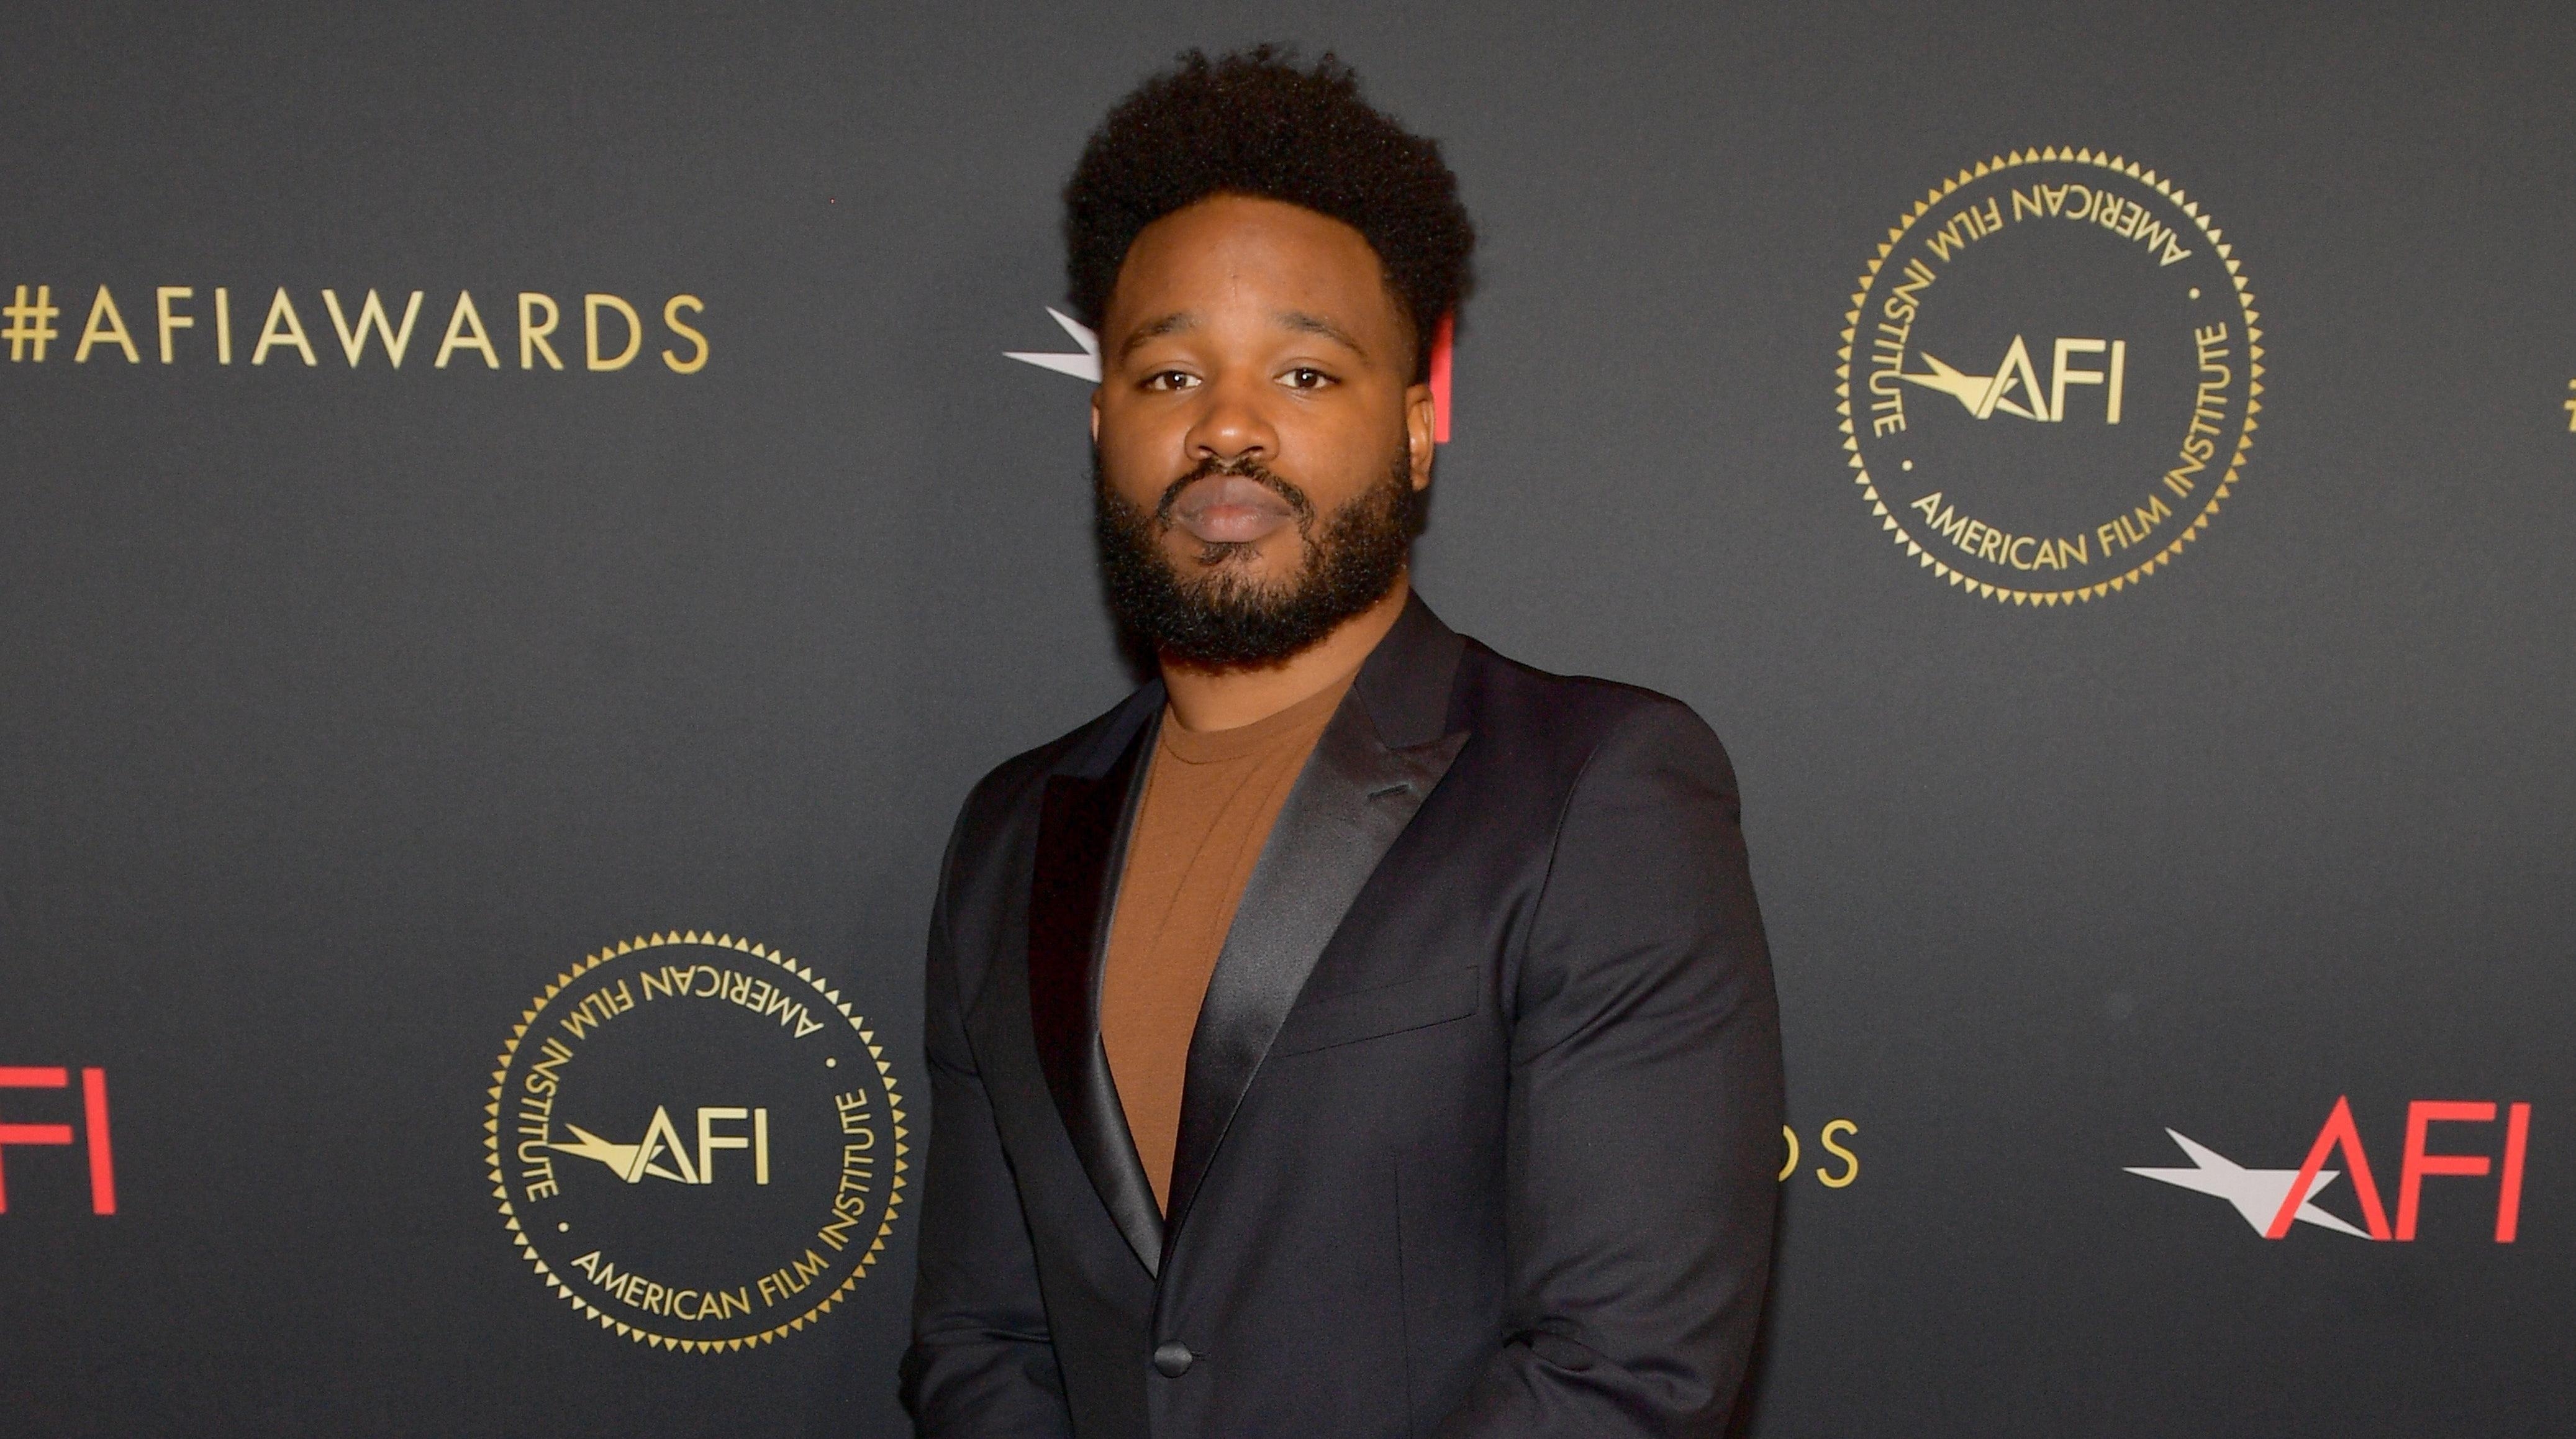 Black Panther director Ryan Coogler was detained by police after he was mistaken for a bank robber